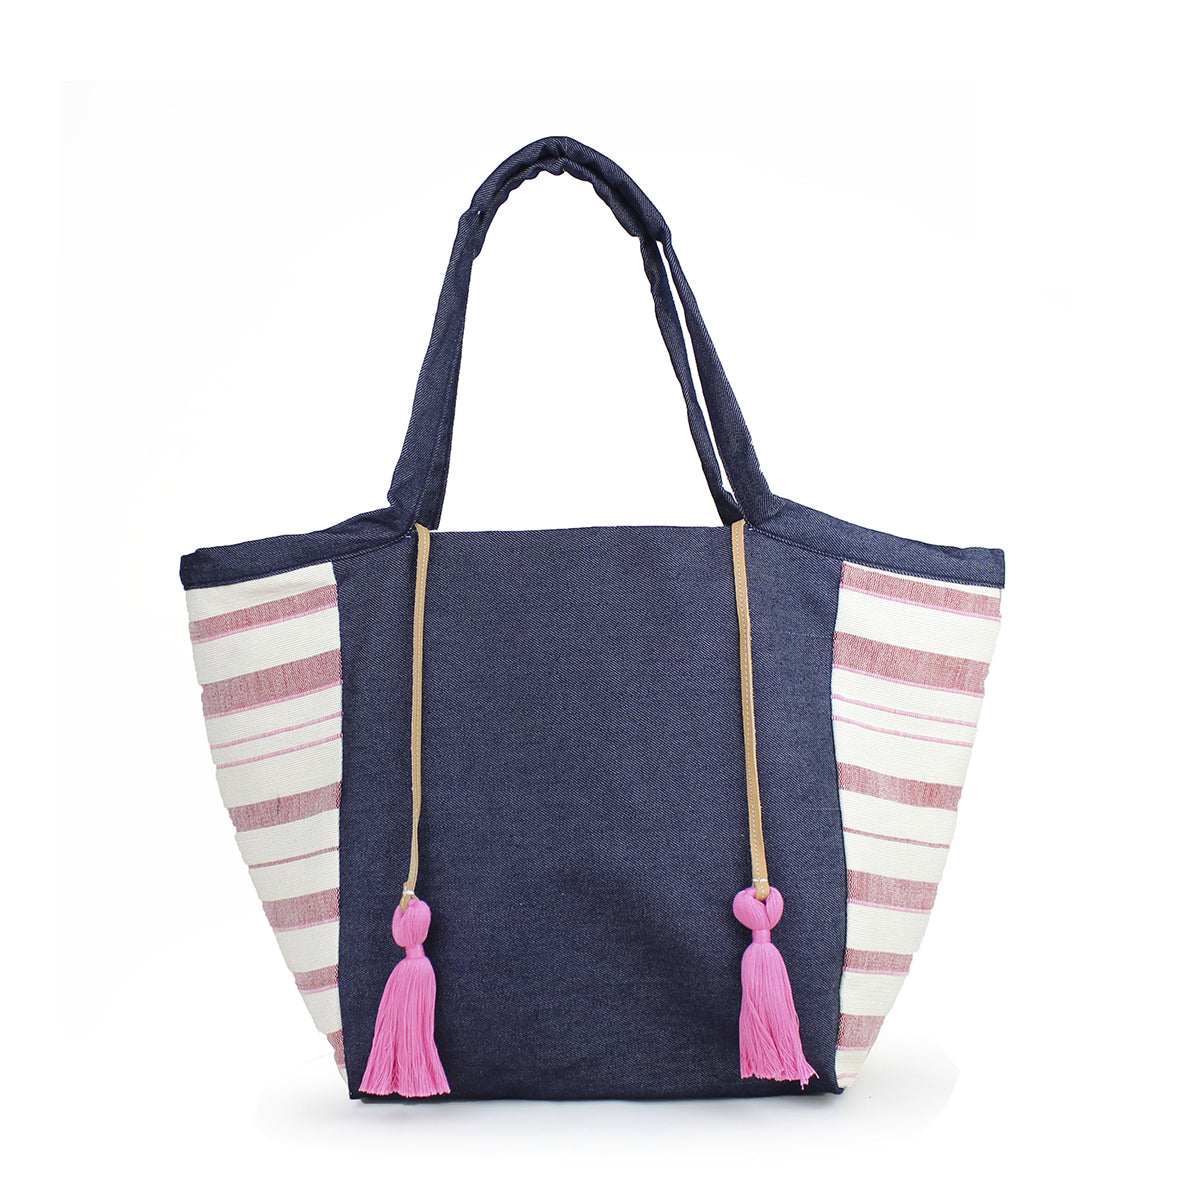 Artisan Rosa Handwoven in Denim Sunset Tote. The tote has a dark wash denim fabric. The sides have a horizontal light red and white striped pattern. It has two pink tassels attached to a leather cord.